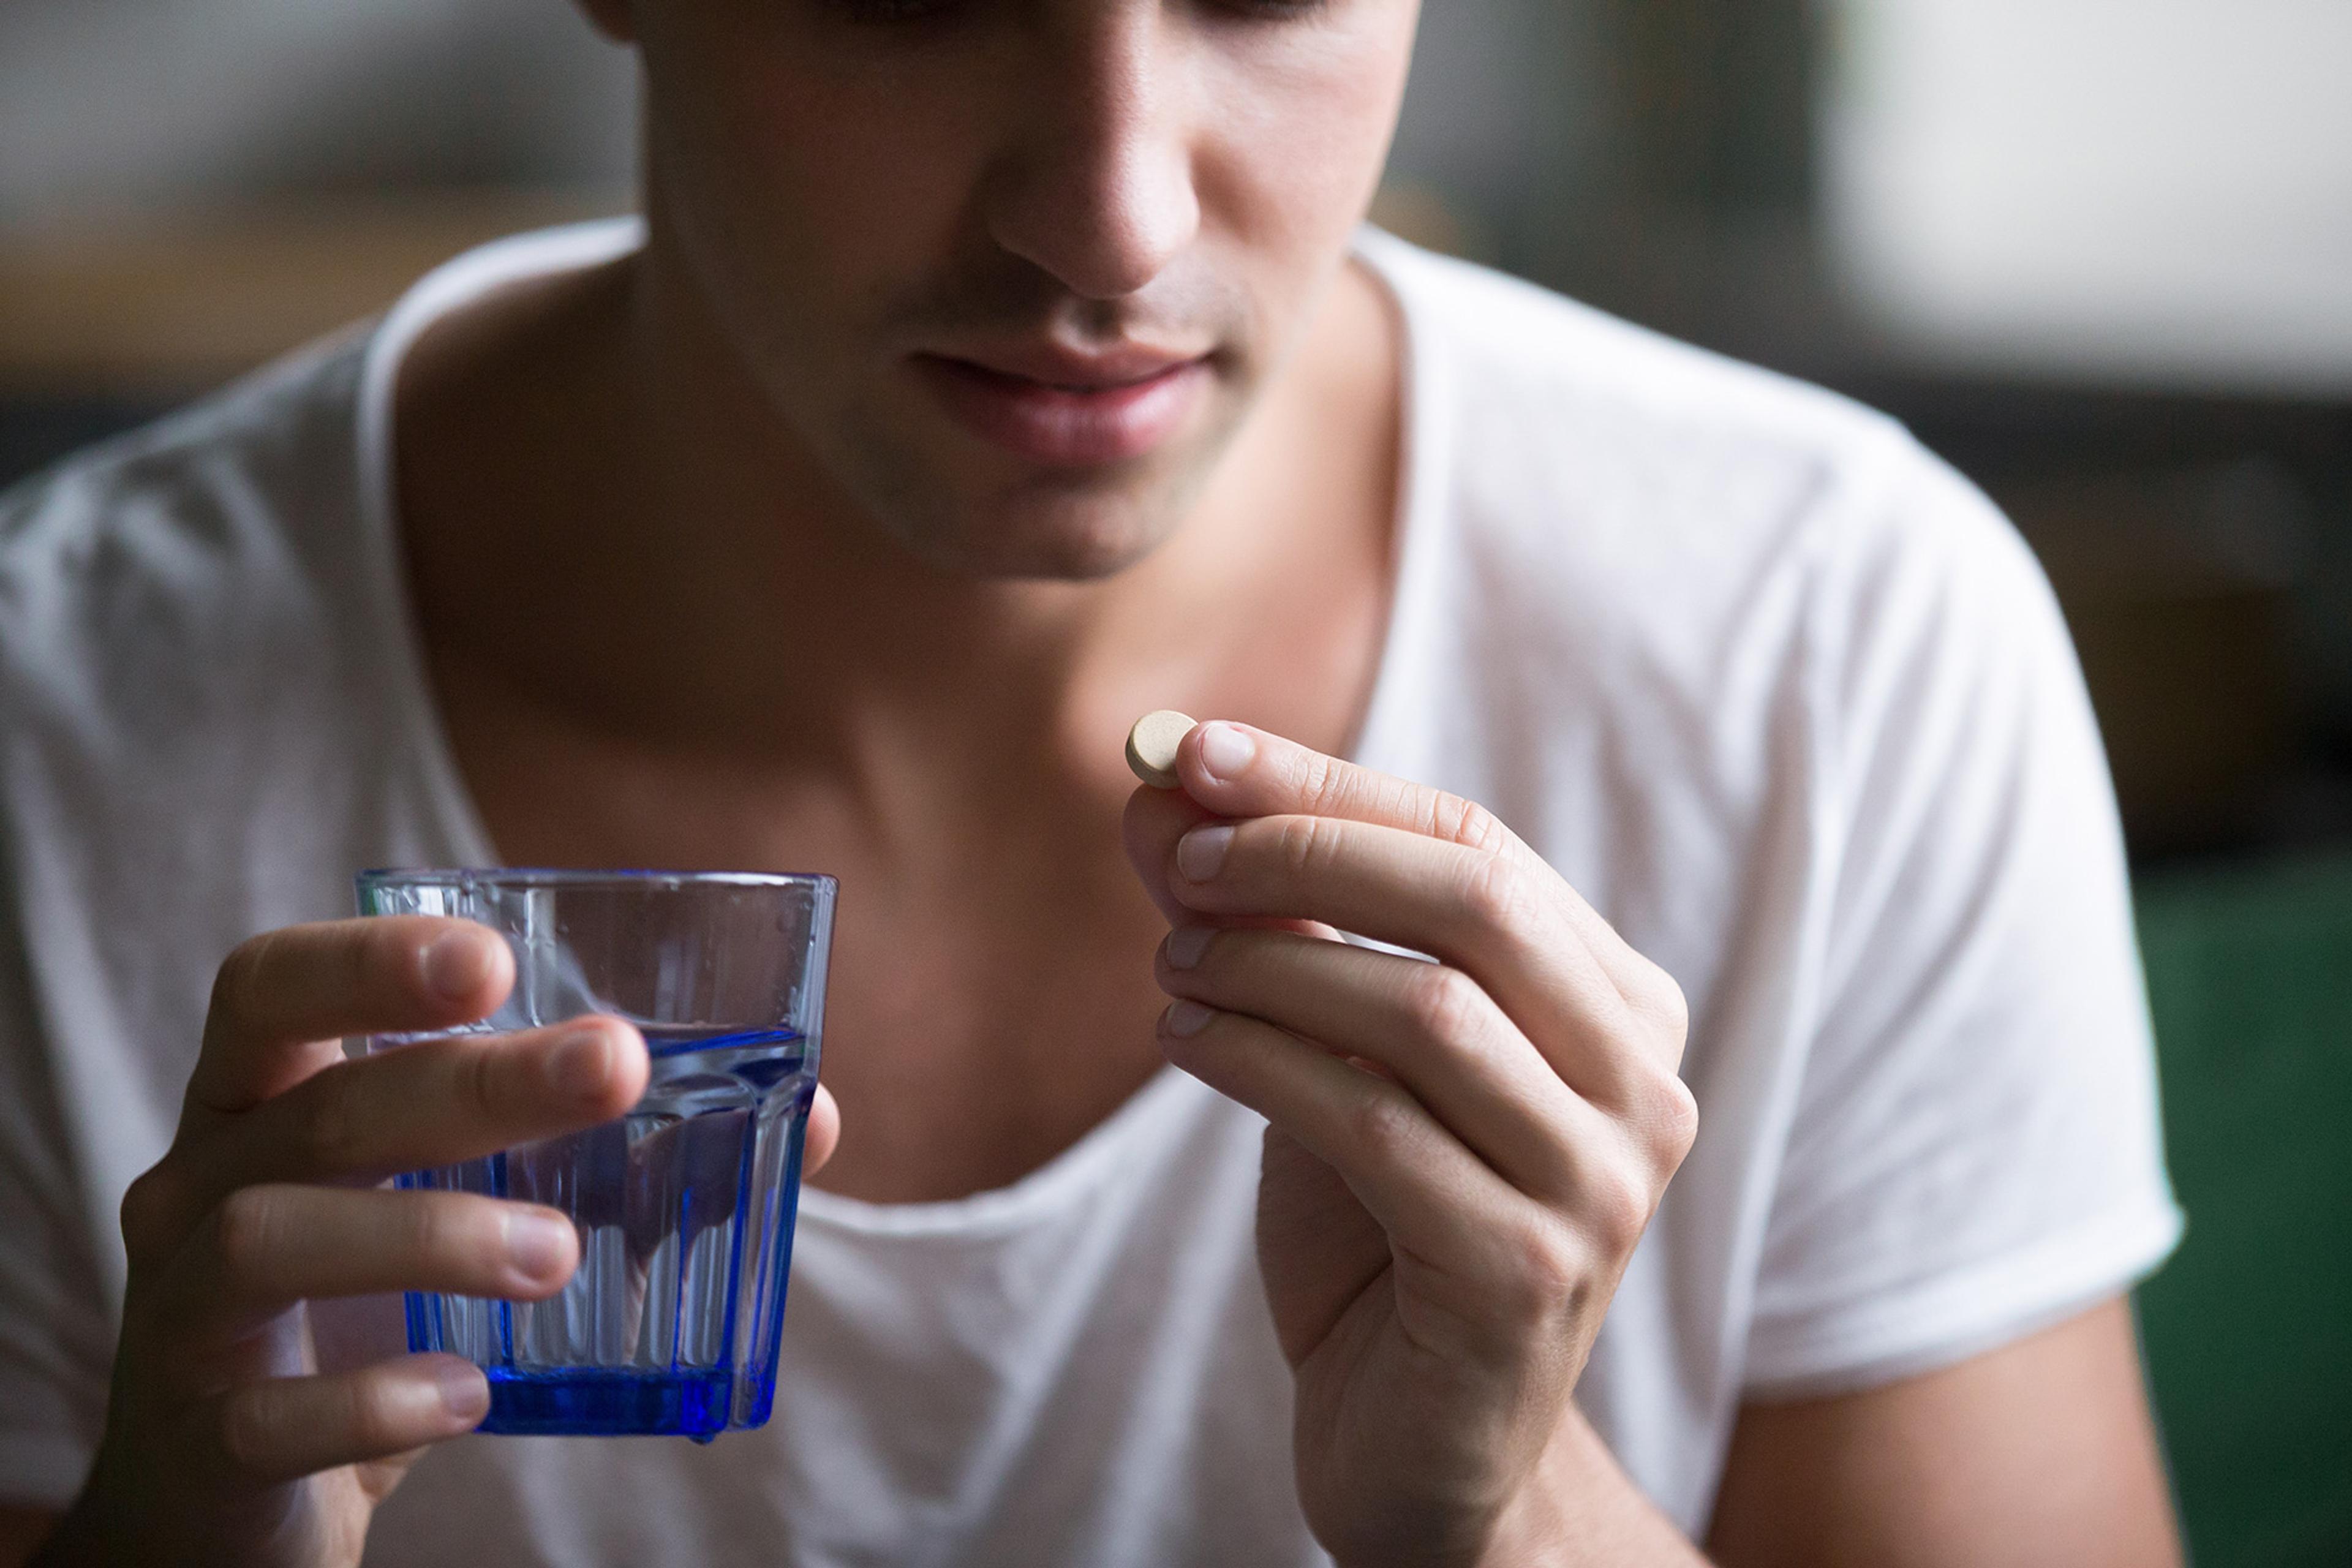 Young man examining pill worried about finasteride side effects.